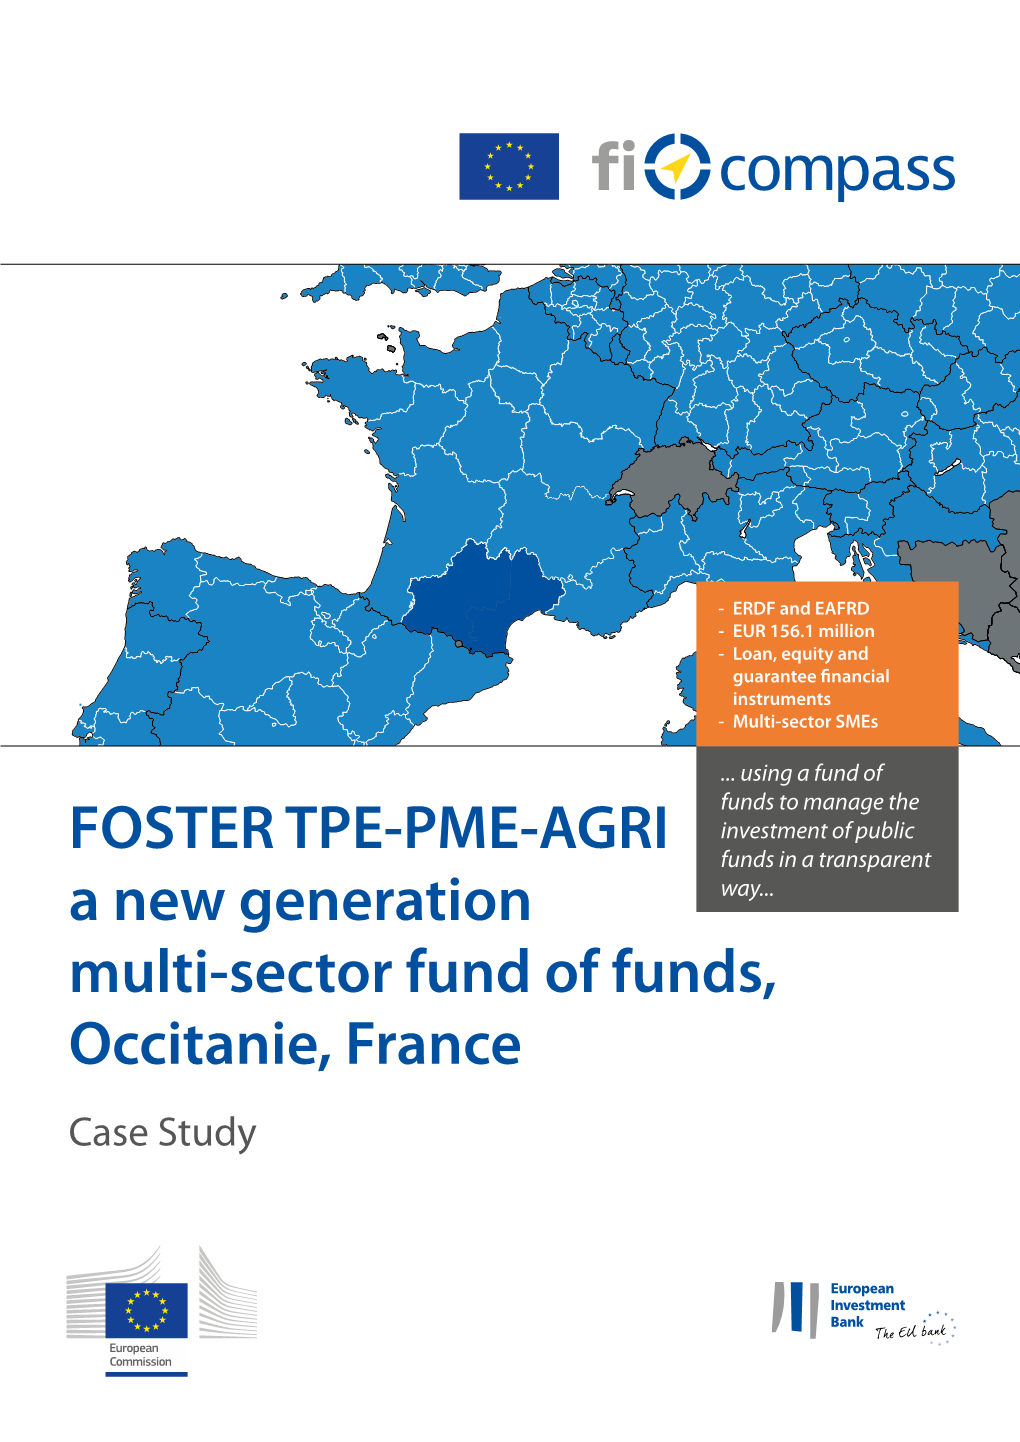 FOSTER TPE-PME-AGRI a New Generation Multi-Sector Fund Of